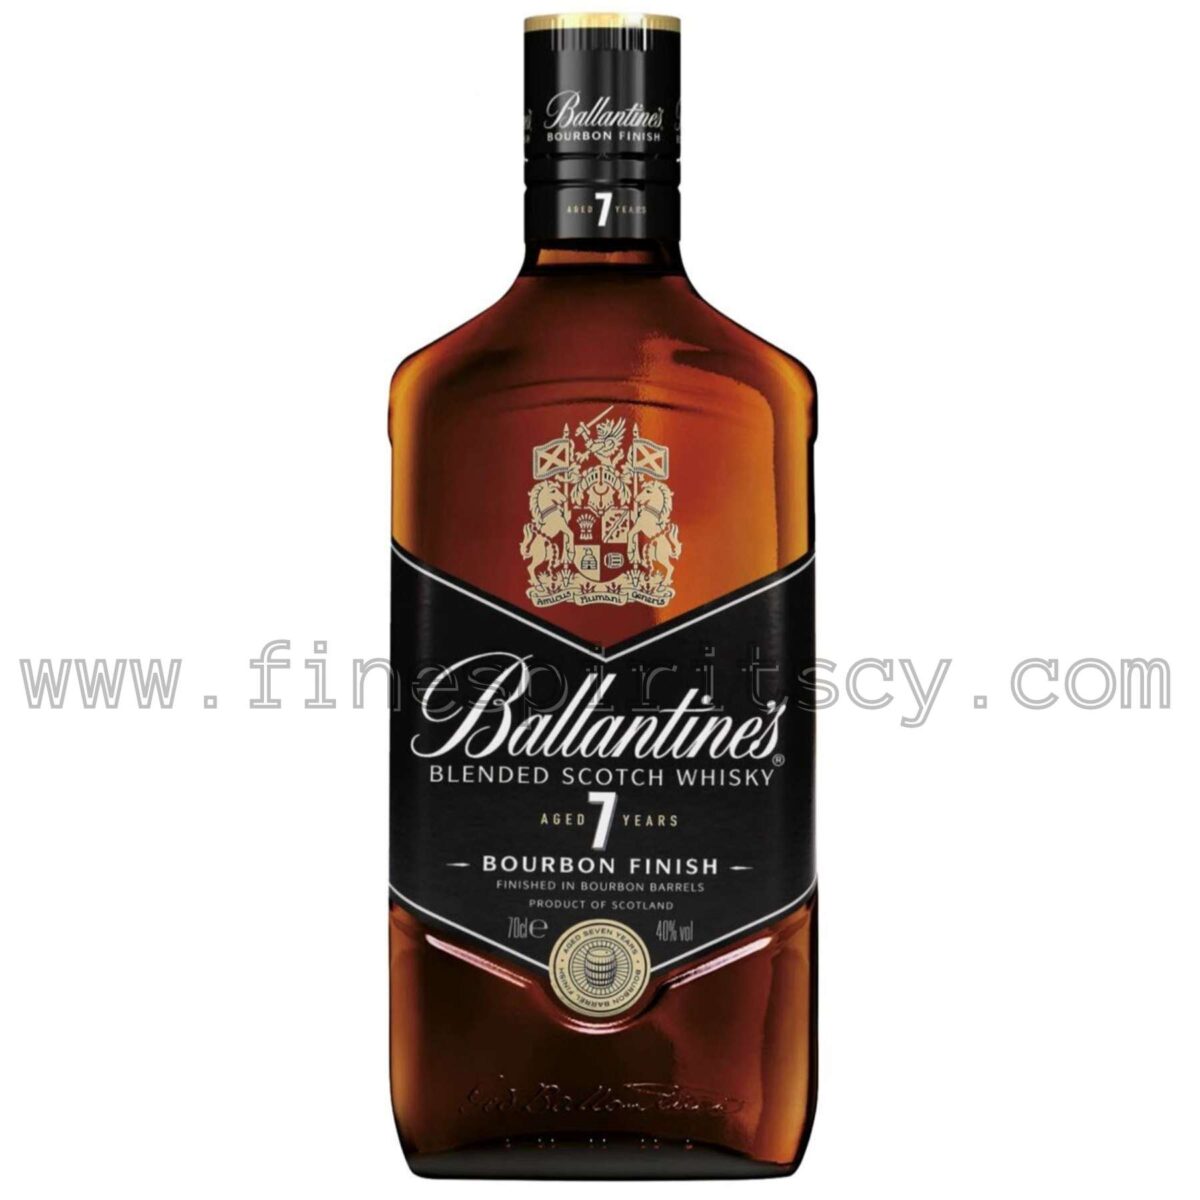 Ballantines 7 Year Old CY Bourbon Finish Scotch Price Whisky Cyprus Online